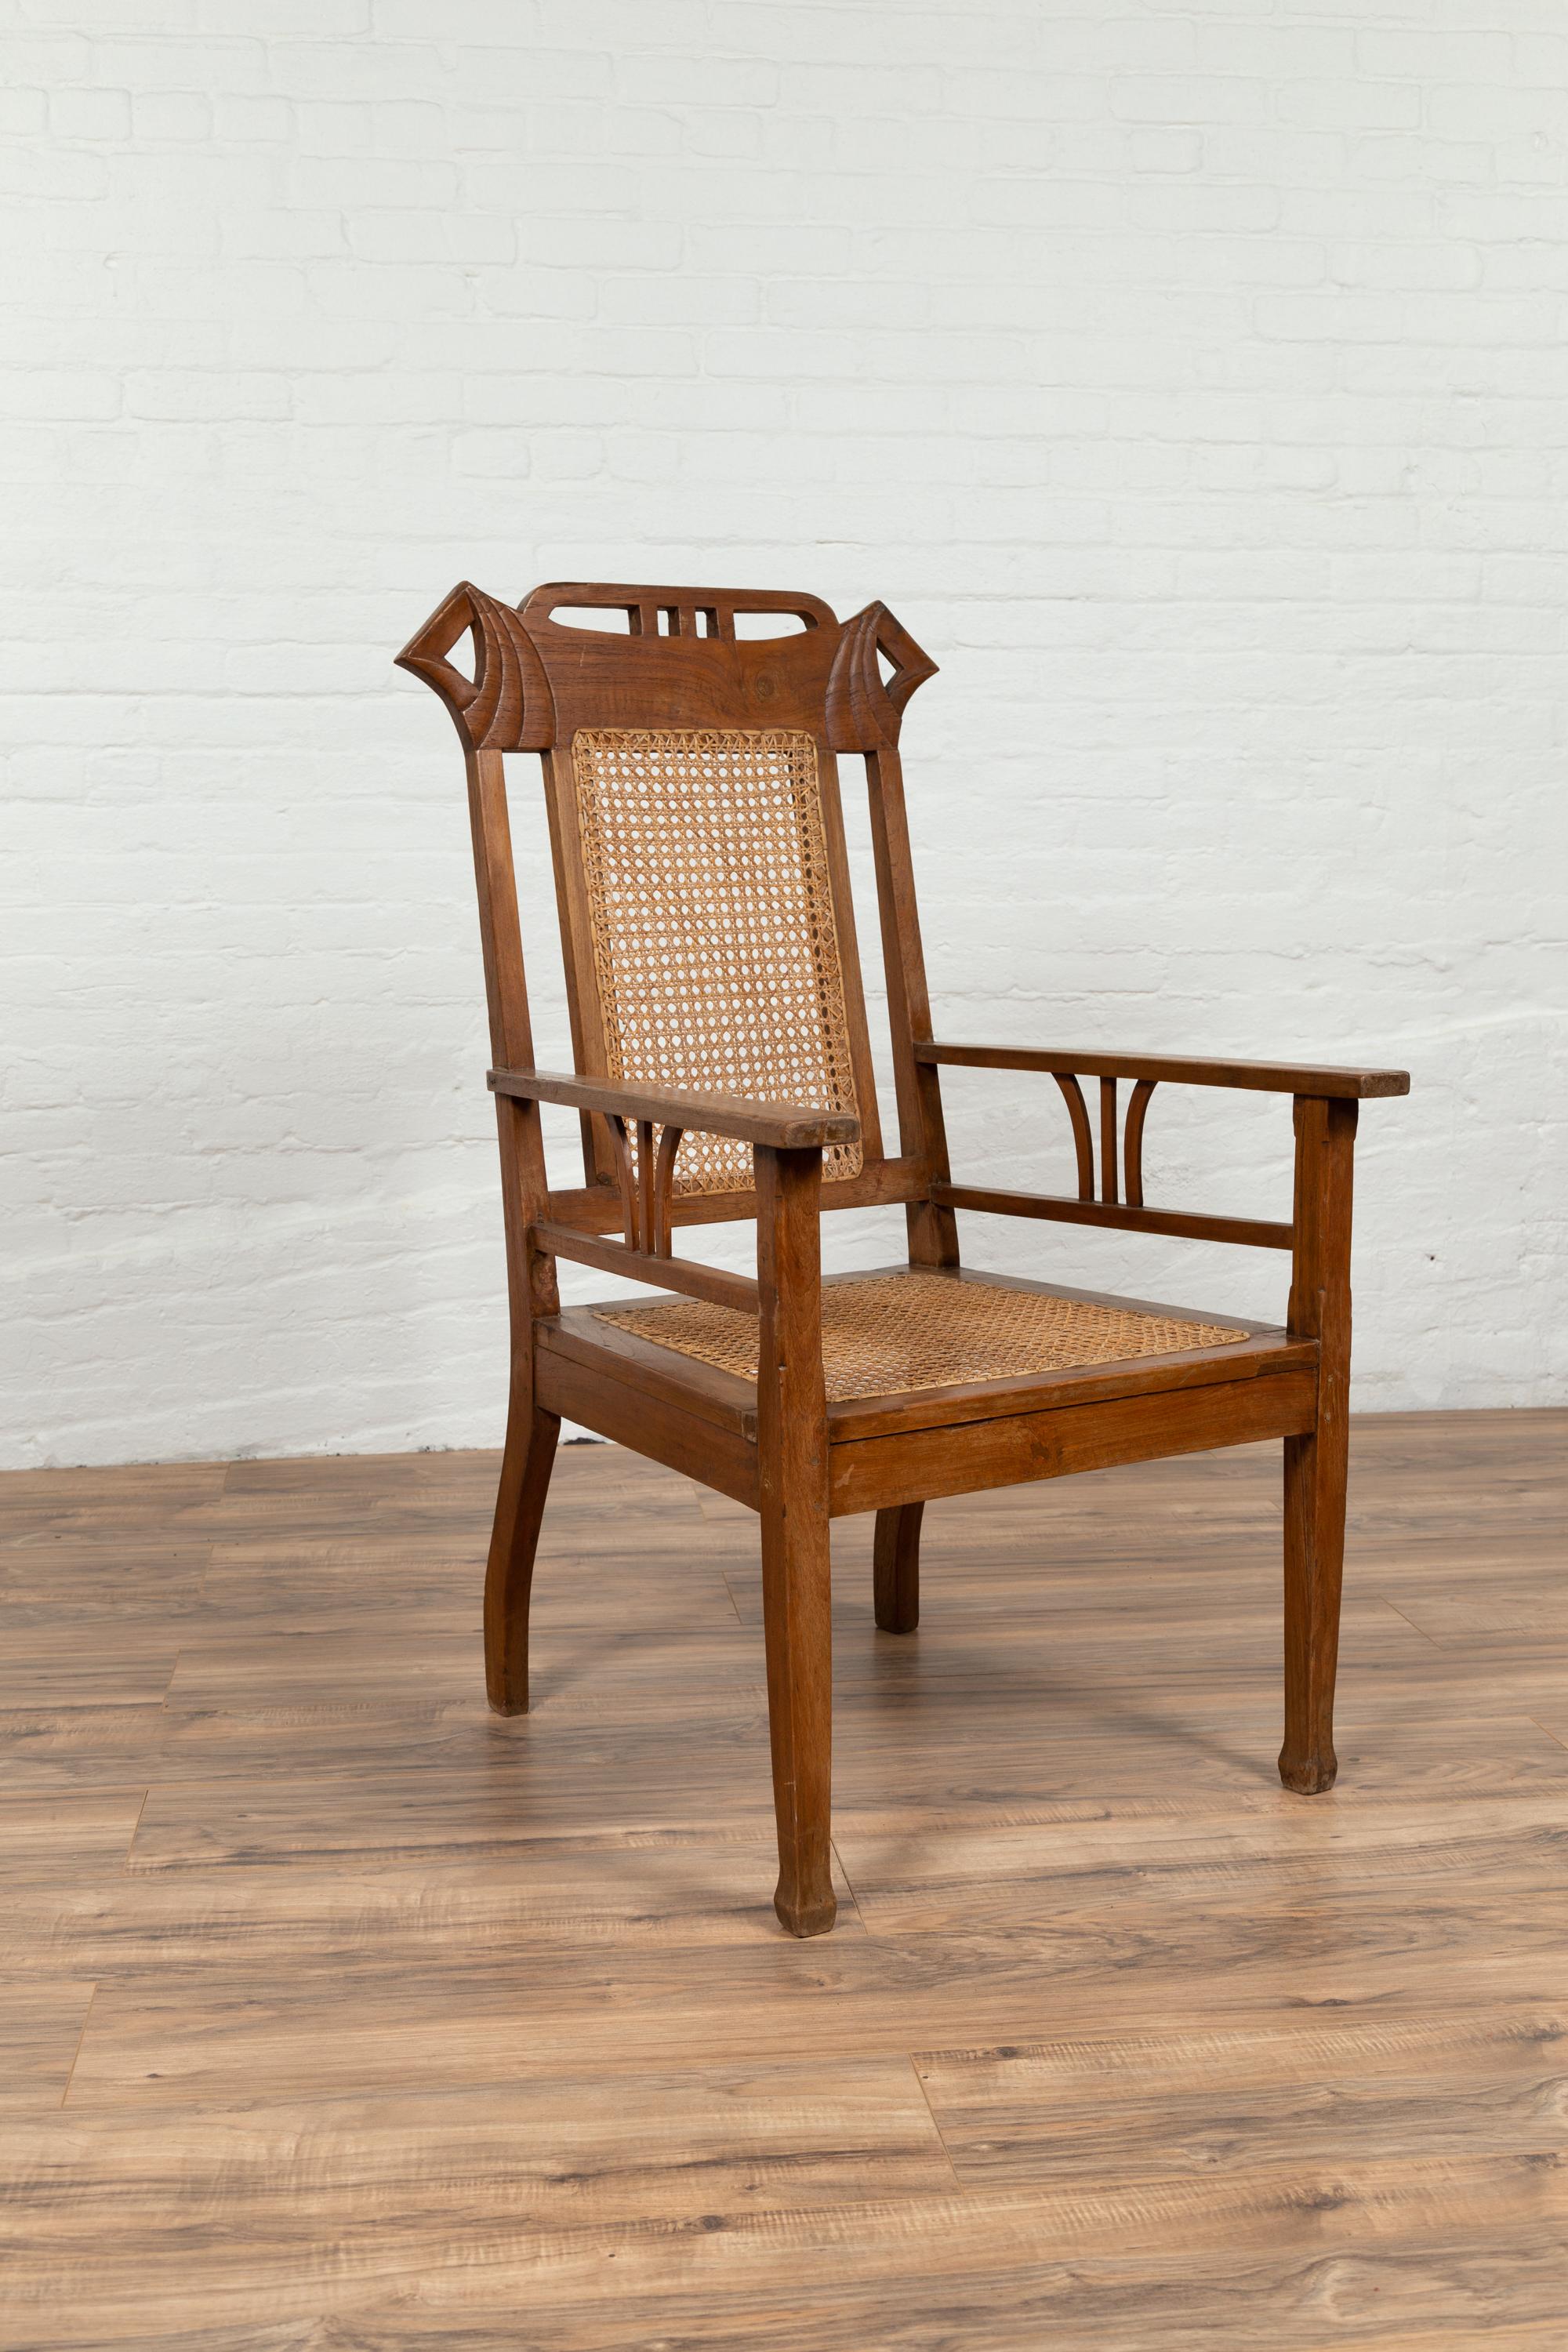 Vintage Indonesian Teak Wood Dutch Colonial Armchair with Rattan Seat and Back 3